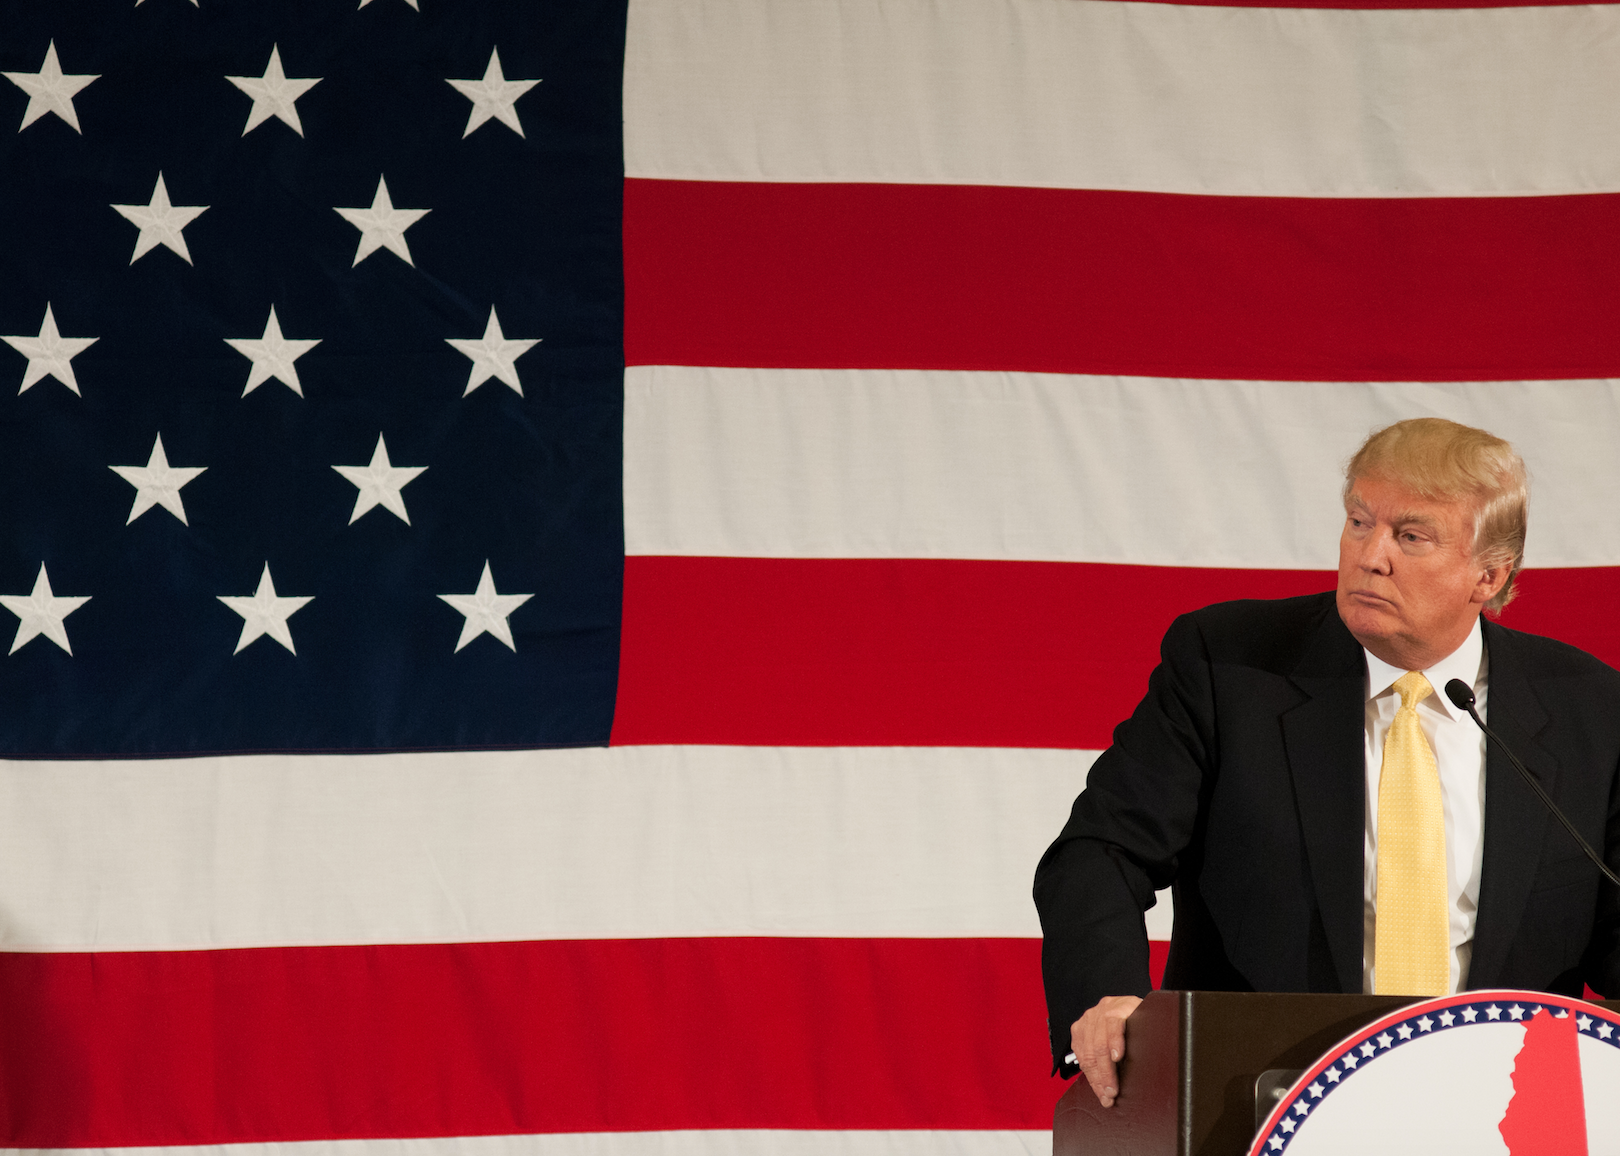 Donald Trump in a black suit at a podium in front of an American flag.